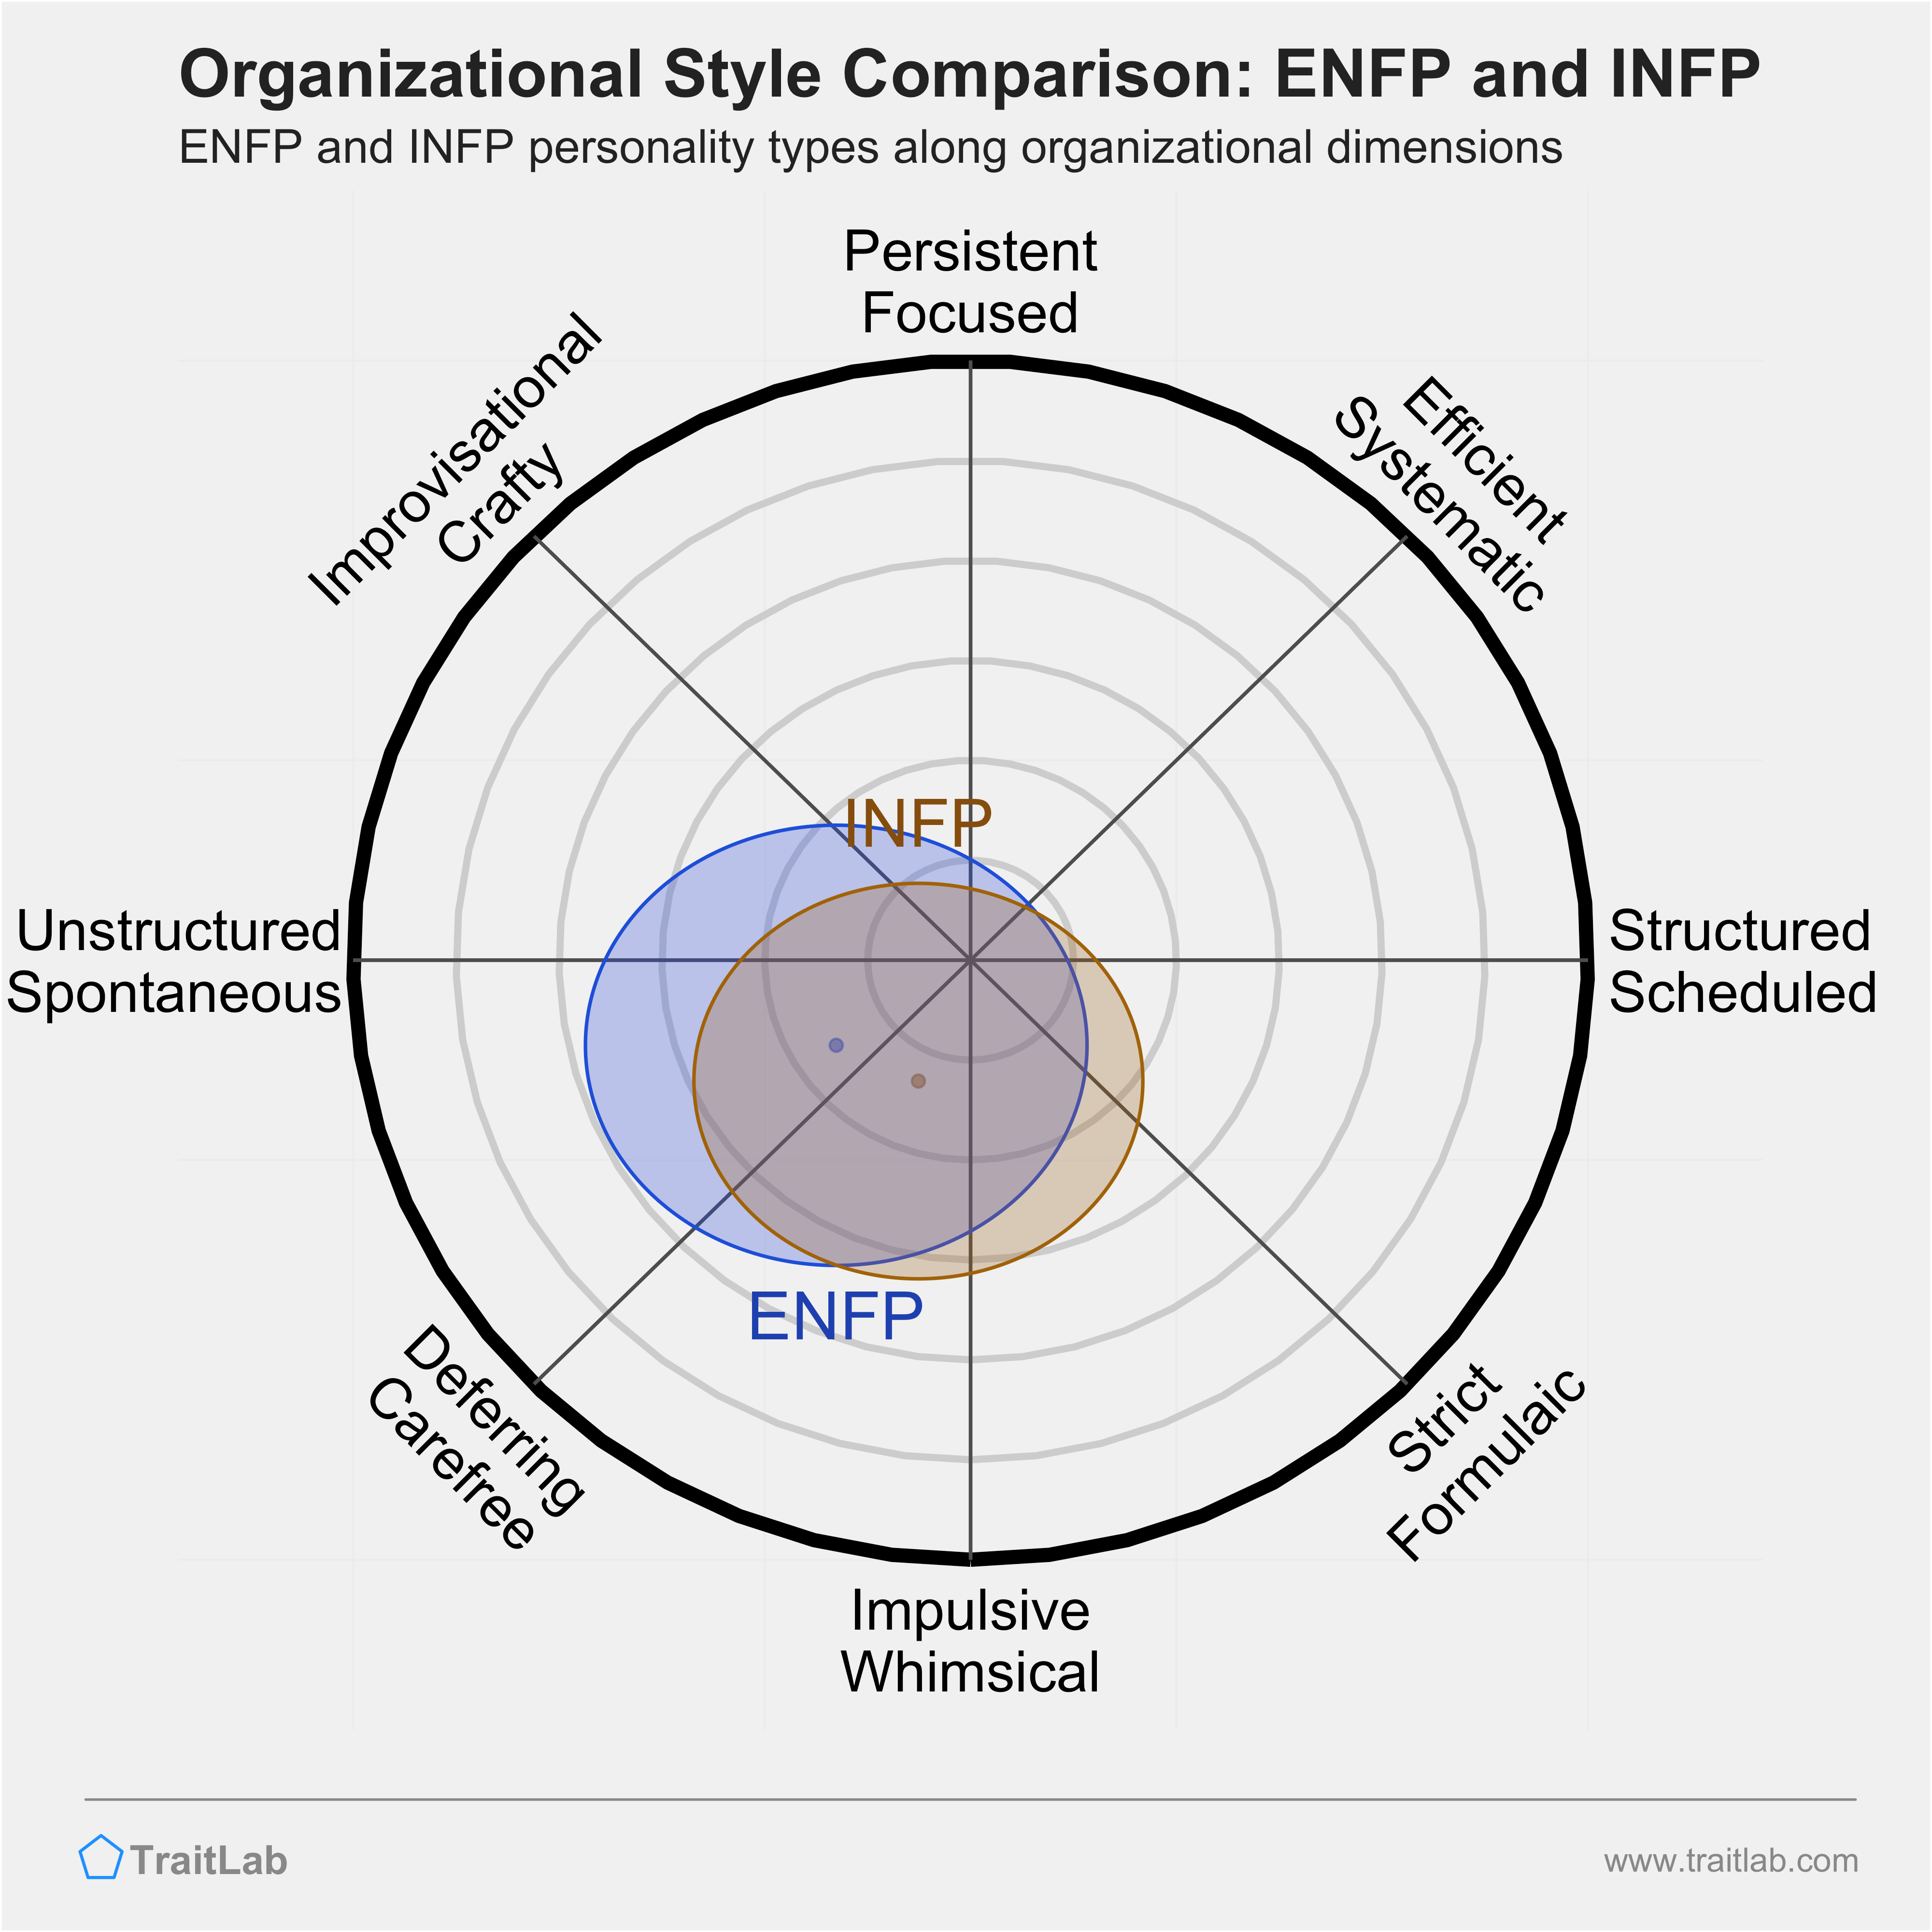 ENFP and INFP comparison across organizational dimensions